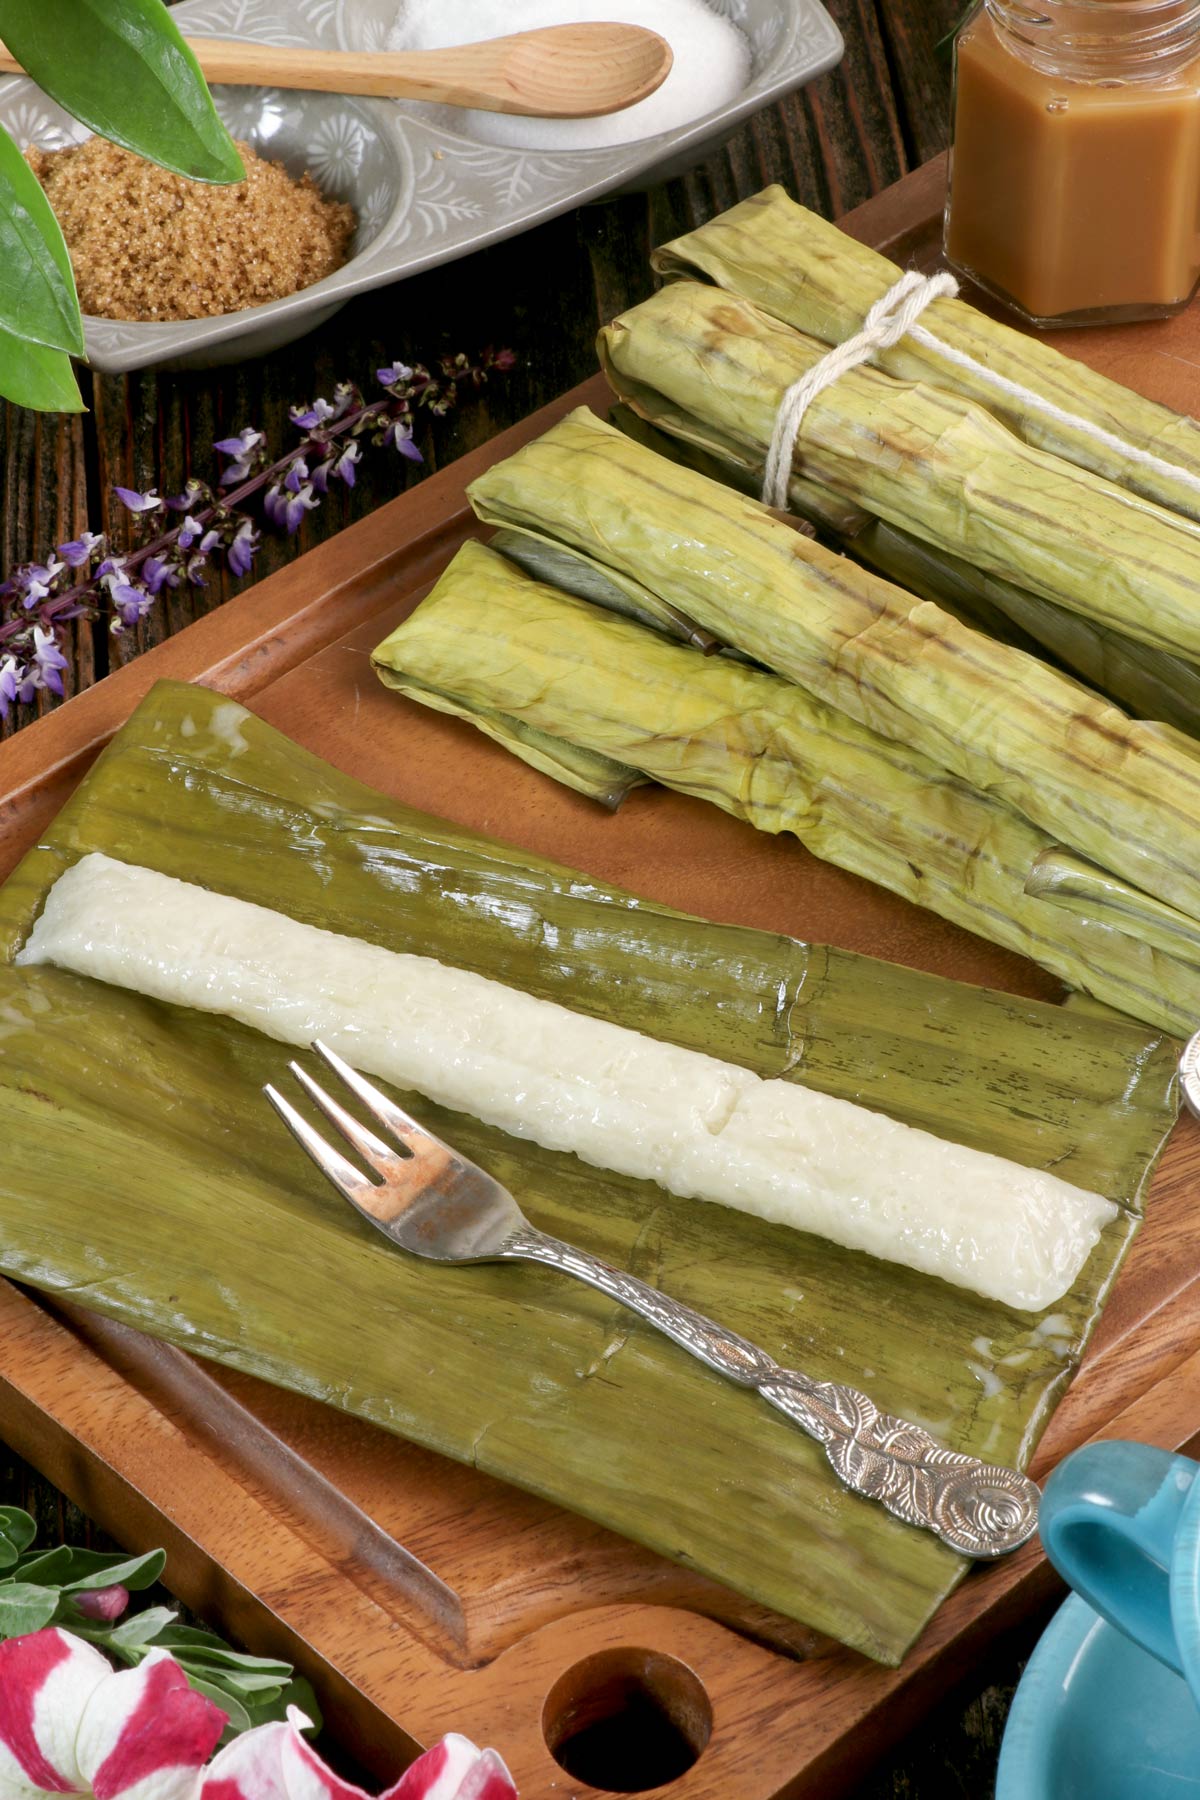 Freshly cooked Suman Malagkit on an unwrapped banana leaf served with a choice of sugar and caramel as dip.